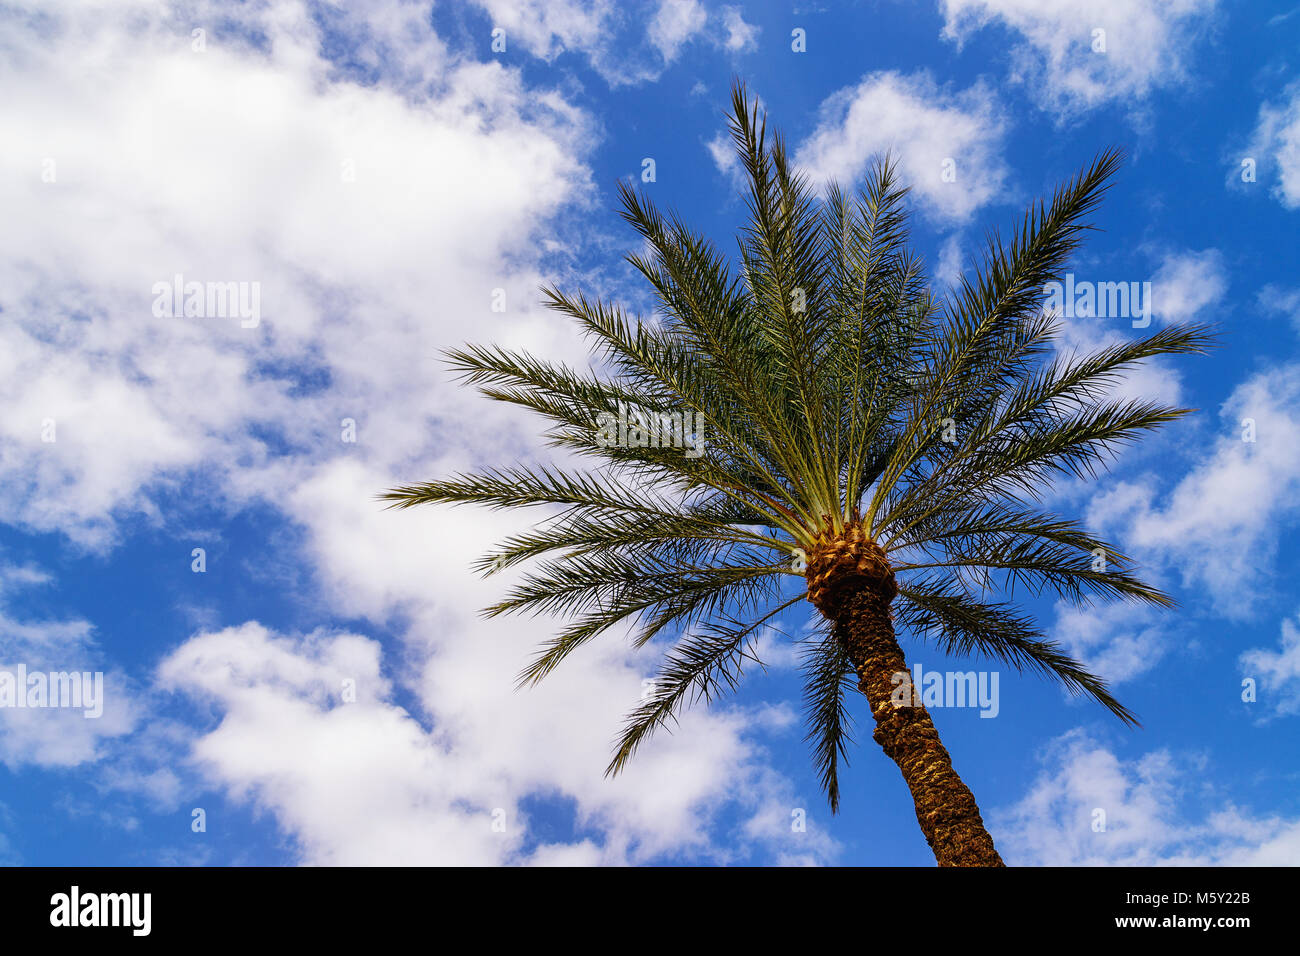 Bottom view of date palm tree (Phoenix dactylifera) with sky and fluffy clouds in background. Shot in Eilat, Israel. Summer holiday and travel theme. Stock Photo